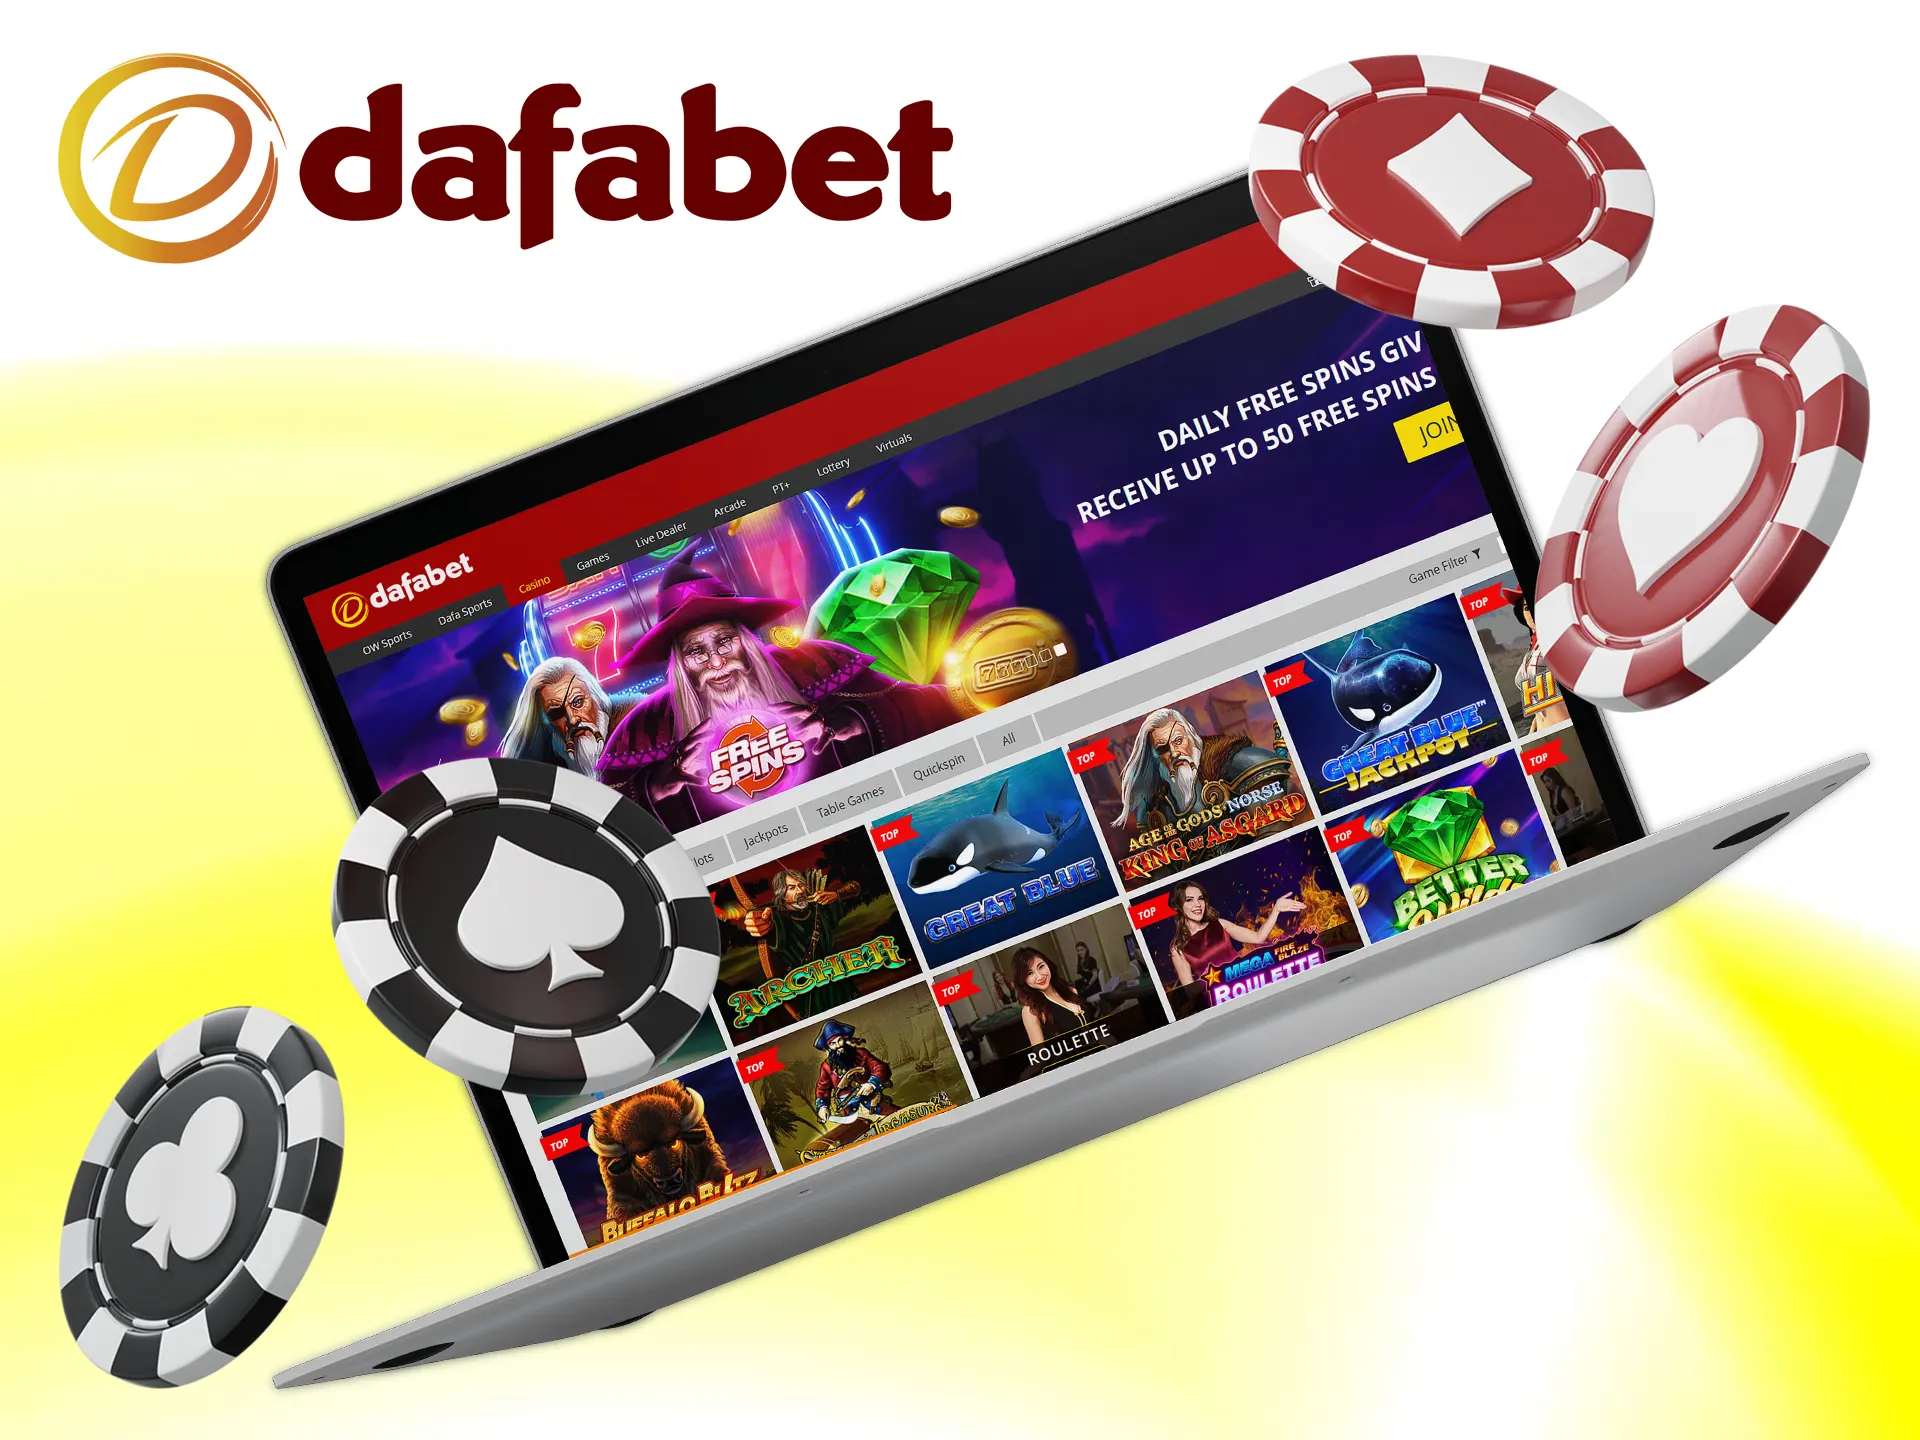 Play casino games and win money at the Dafabet casino.